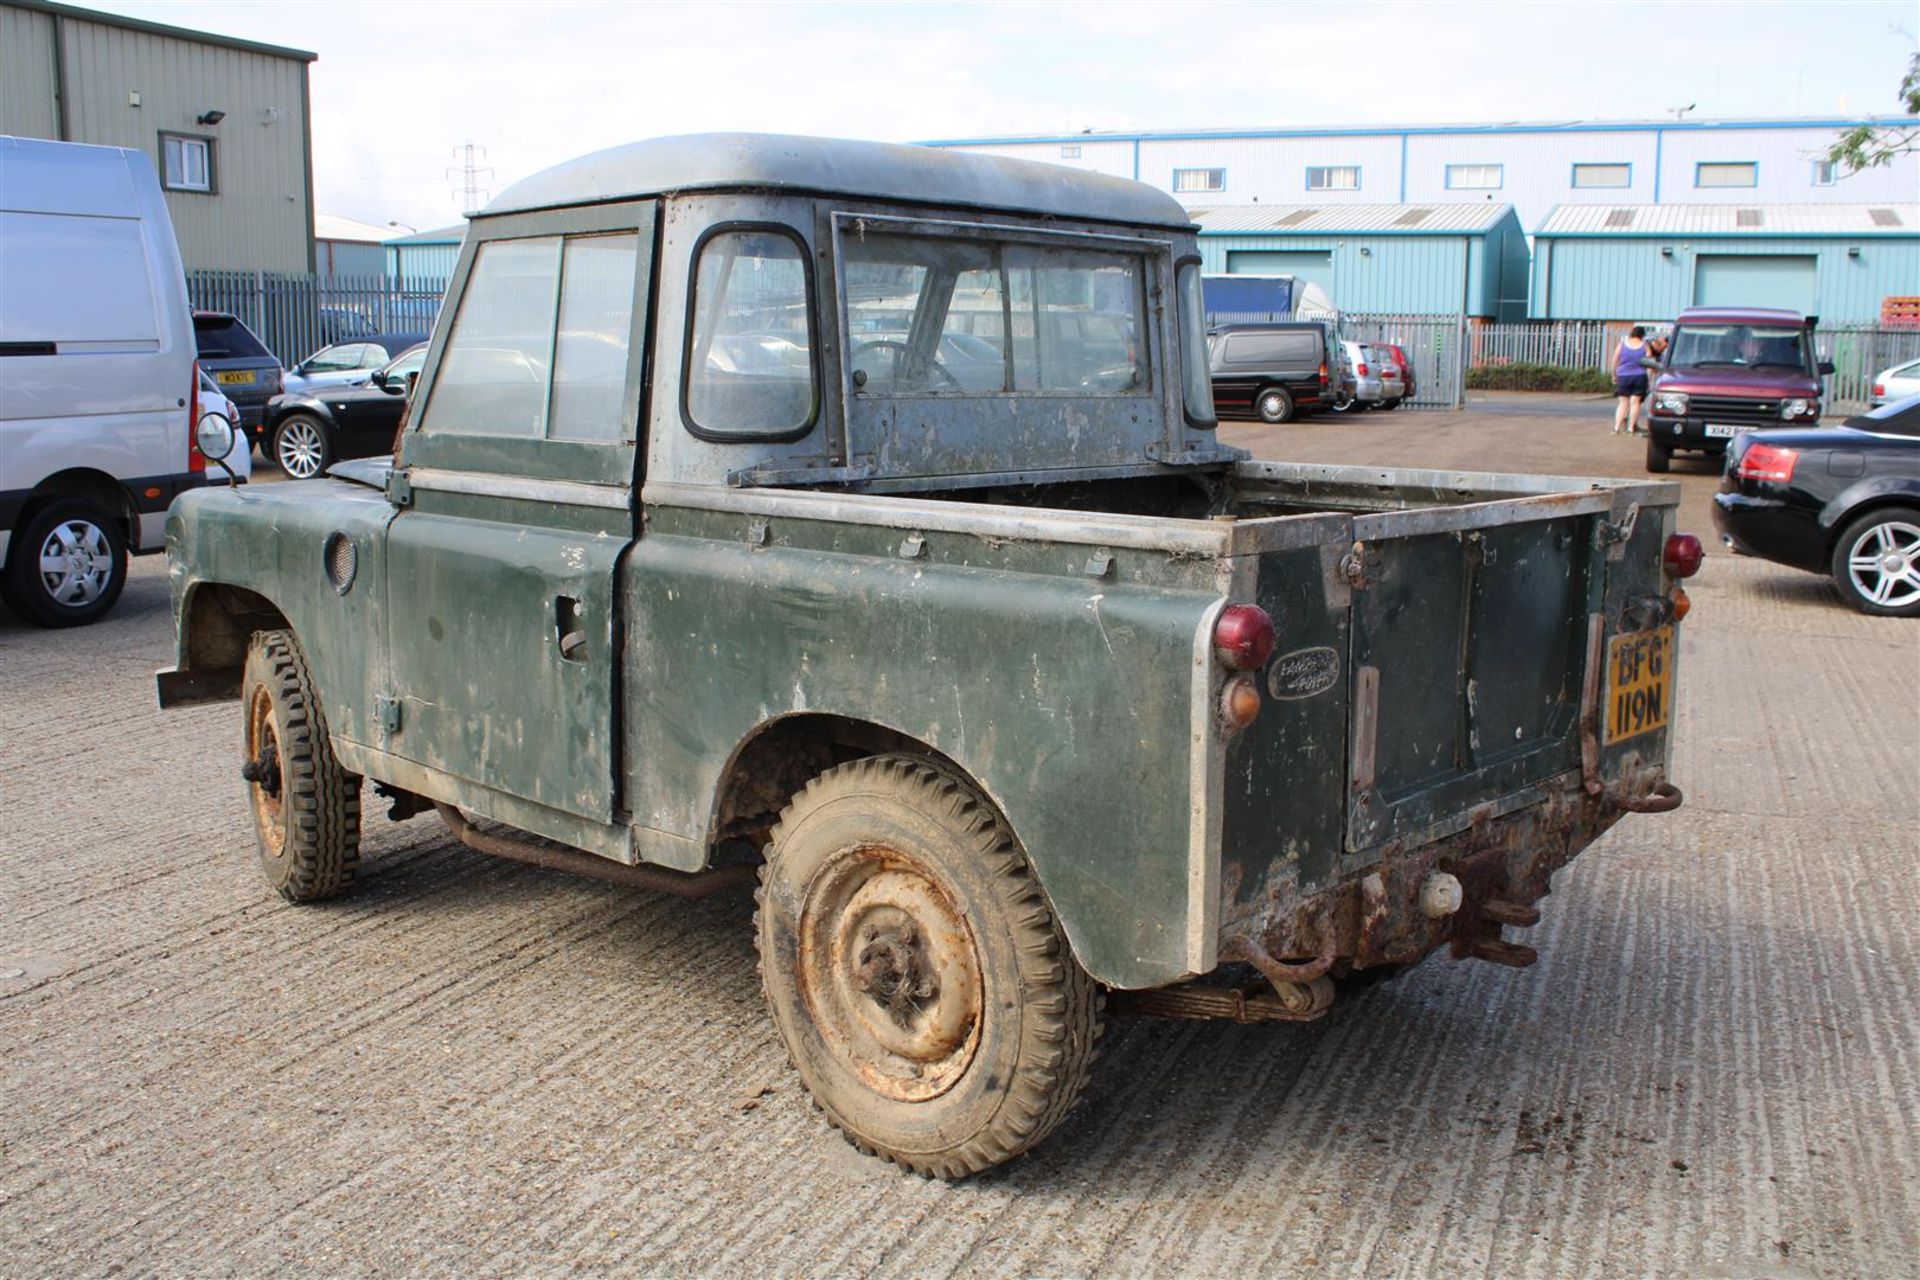 1974 Land Rover Series III Pick-up - Image 3 of 22